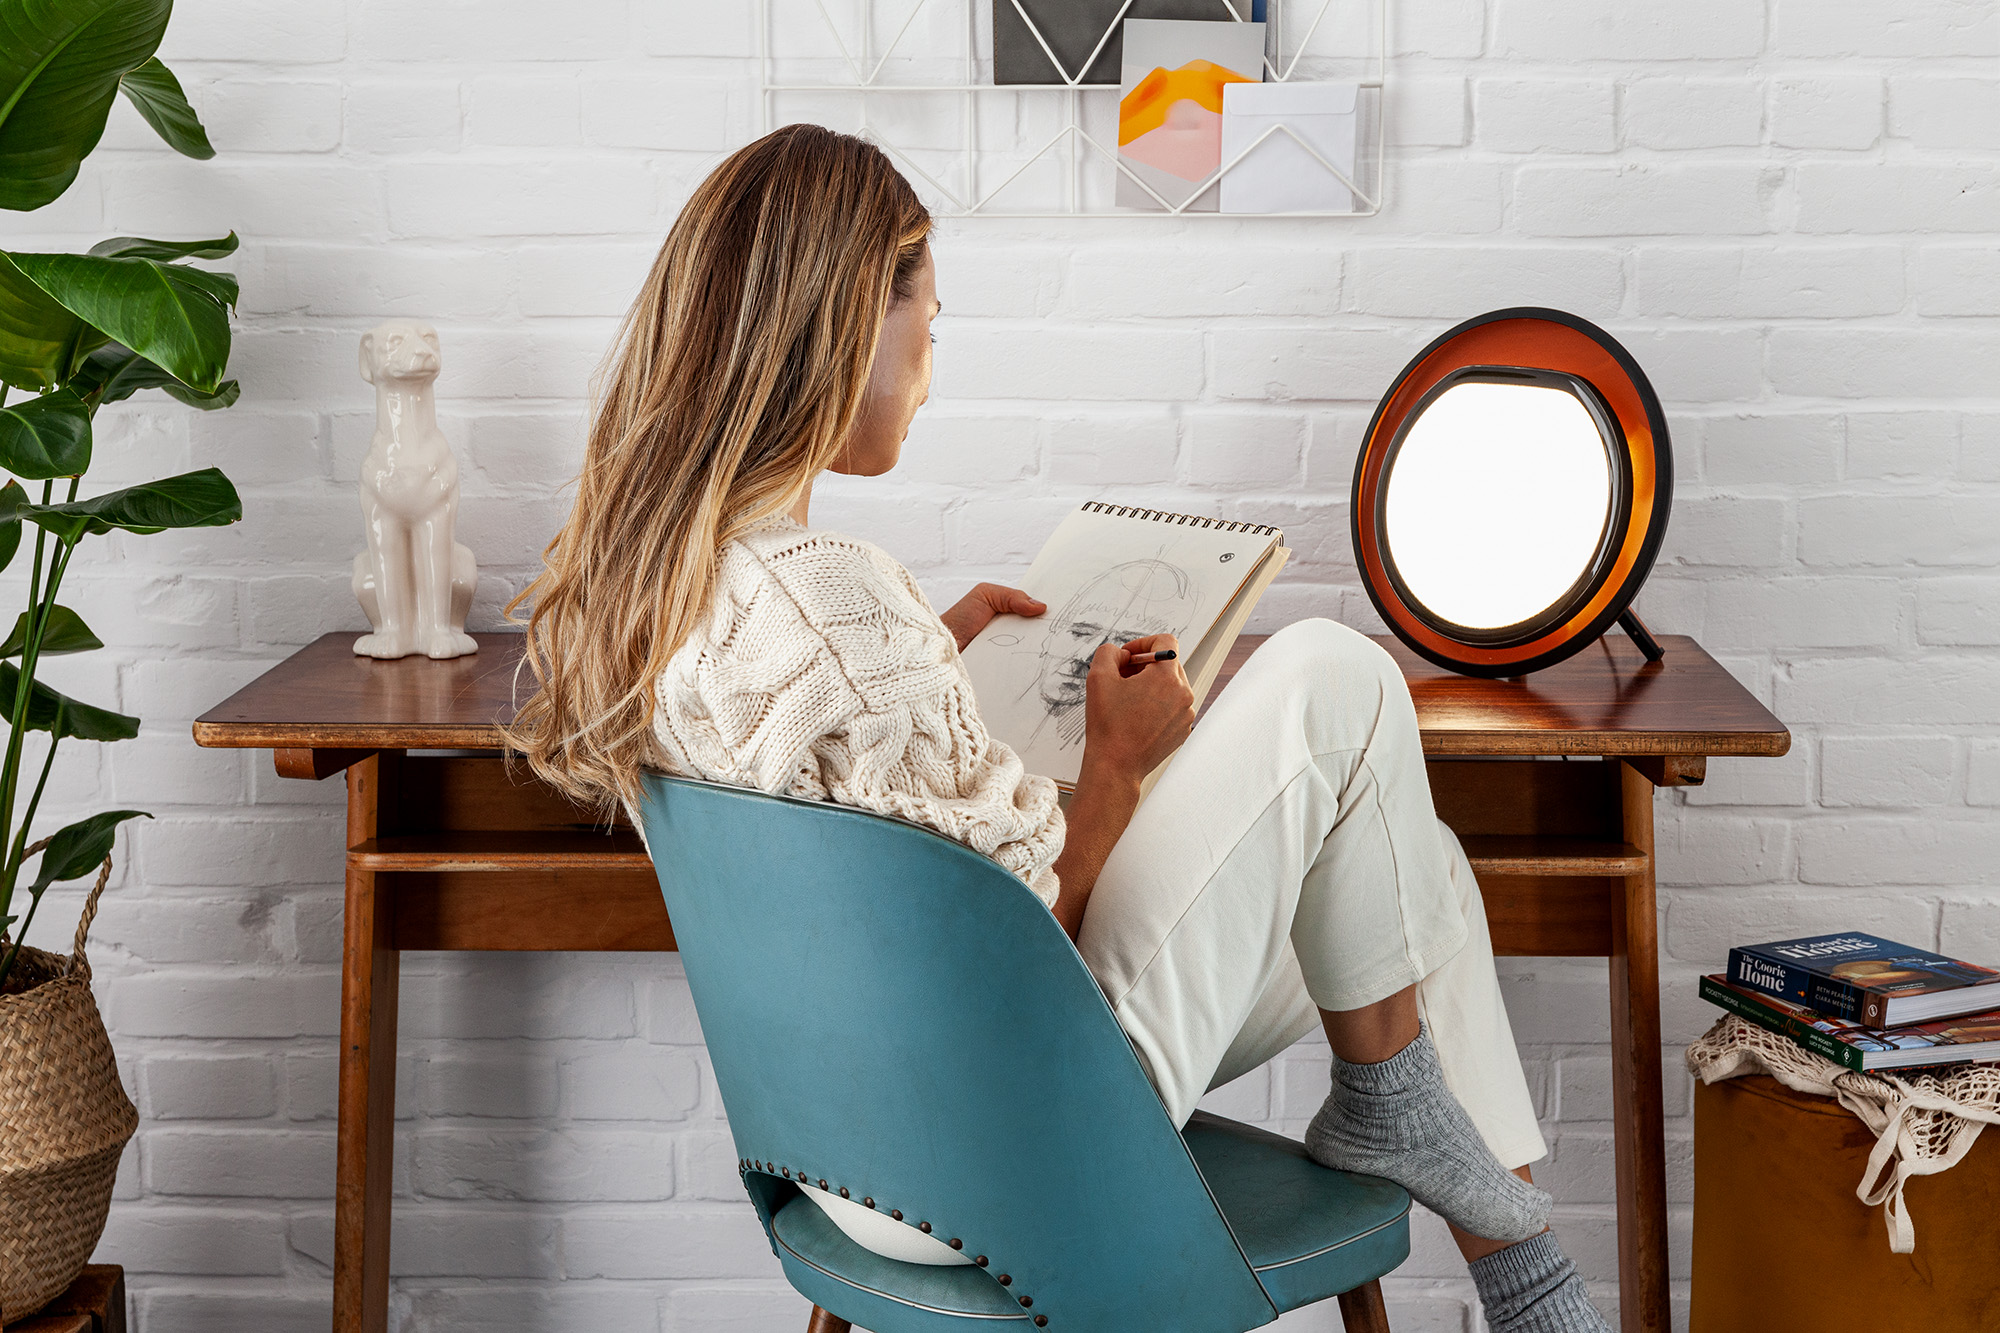 Lumie Halo is a sleek multifunctional light therapy lamp specifically designed to simulate natural sunlight to help fight fatigue, improve focus and mood, give you natural energy and help treat Seasonal Affective Disorder and winter blues in as little as 30 minutes.